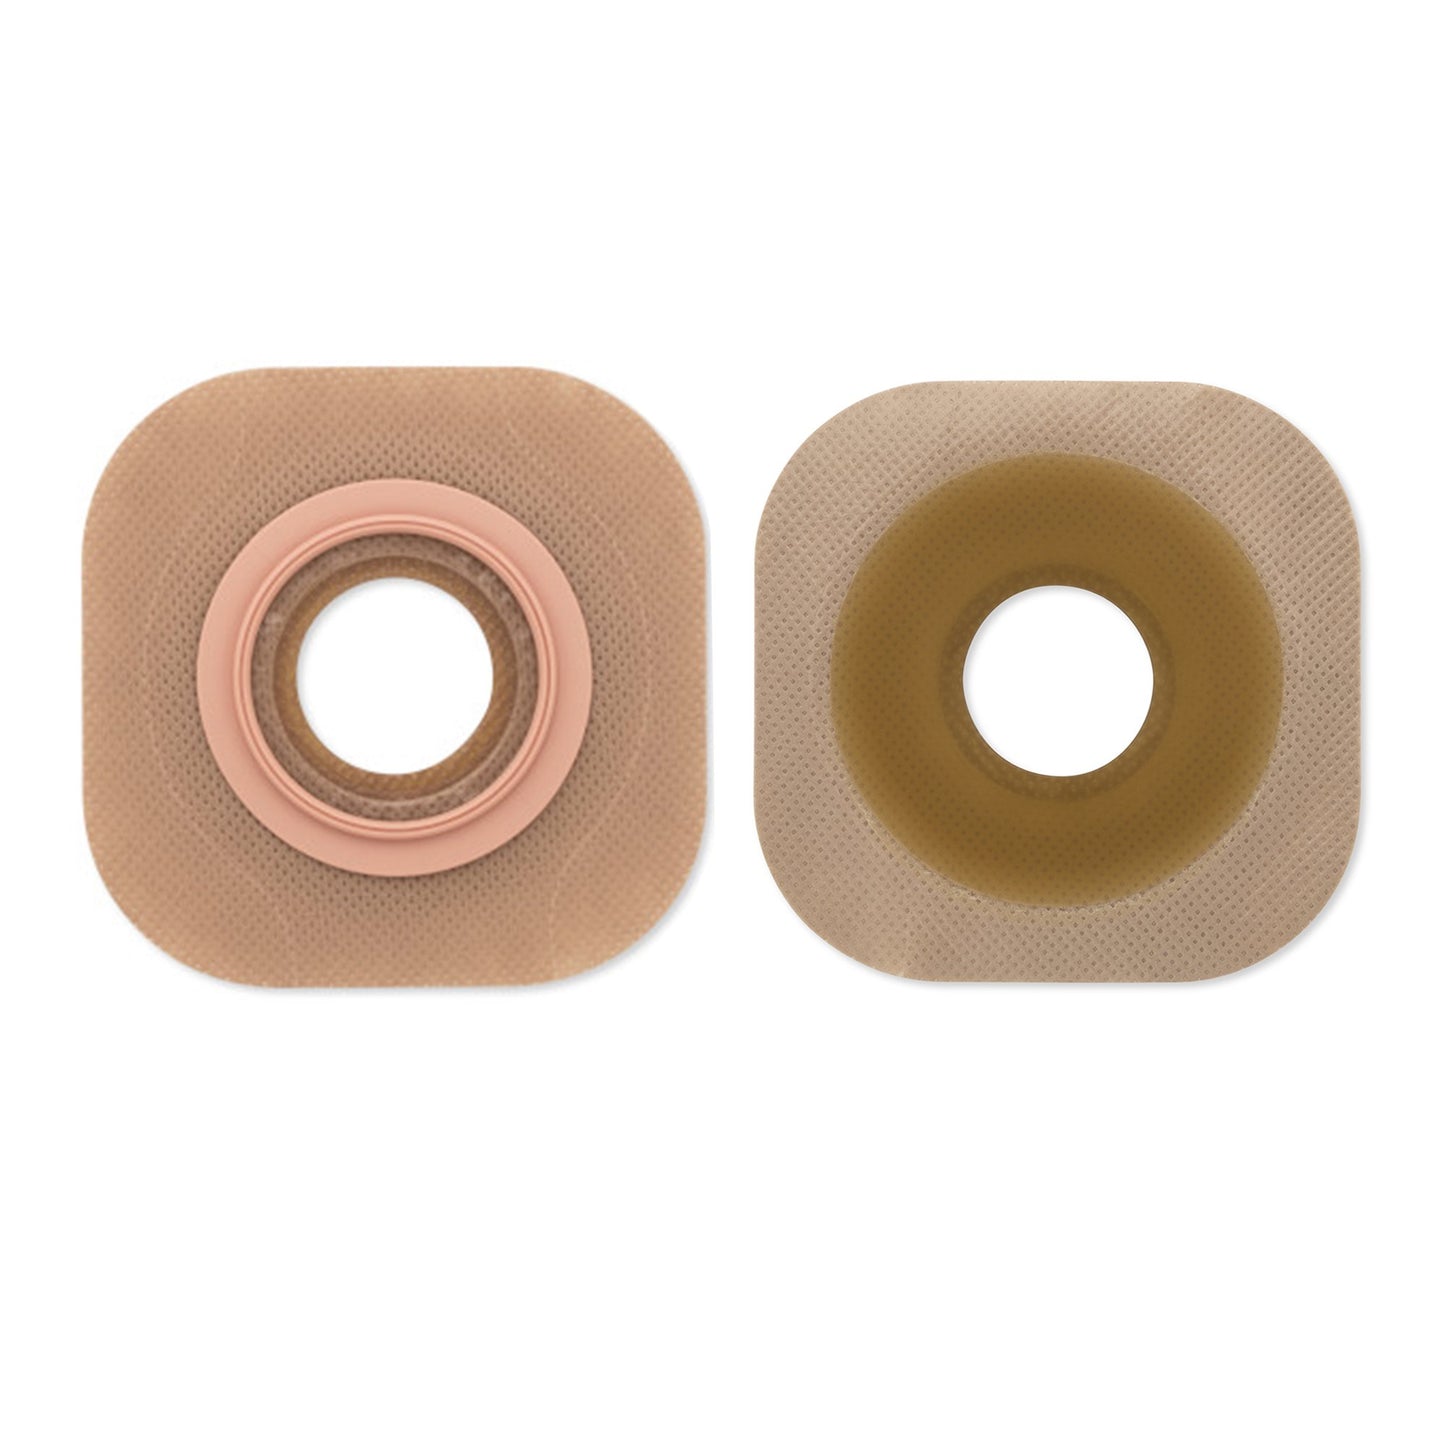 FlexTend™ Ostomy Barrier With Up to 1.75 Inch Stoma Opening, 5 ct